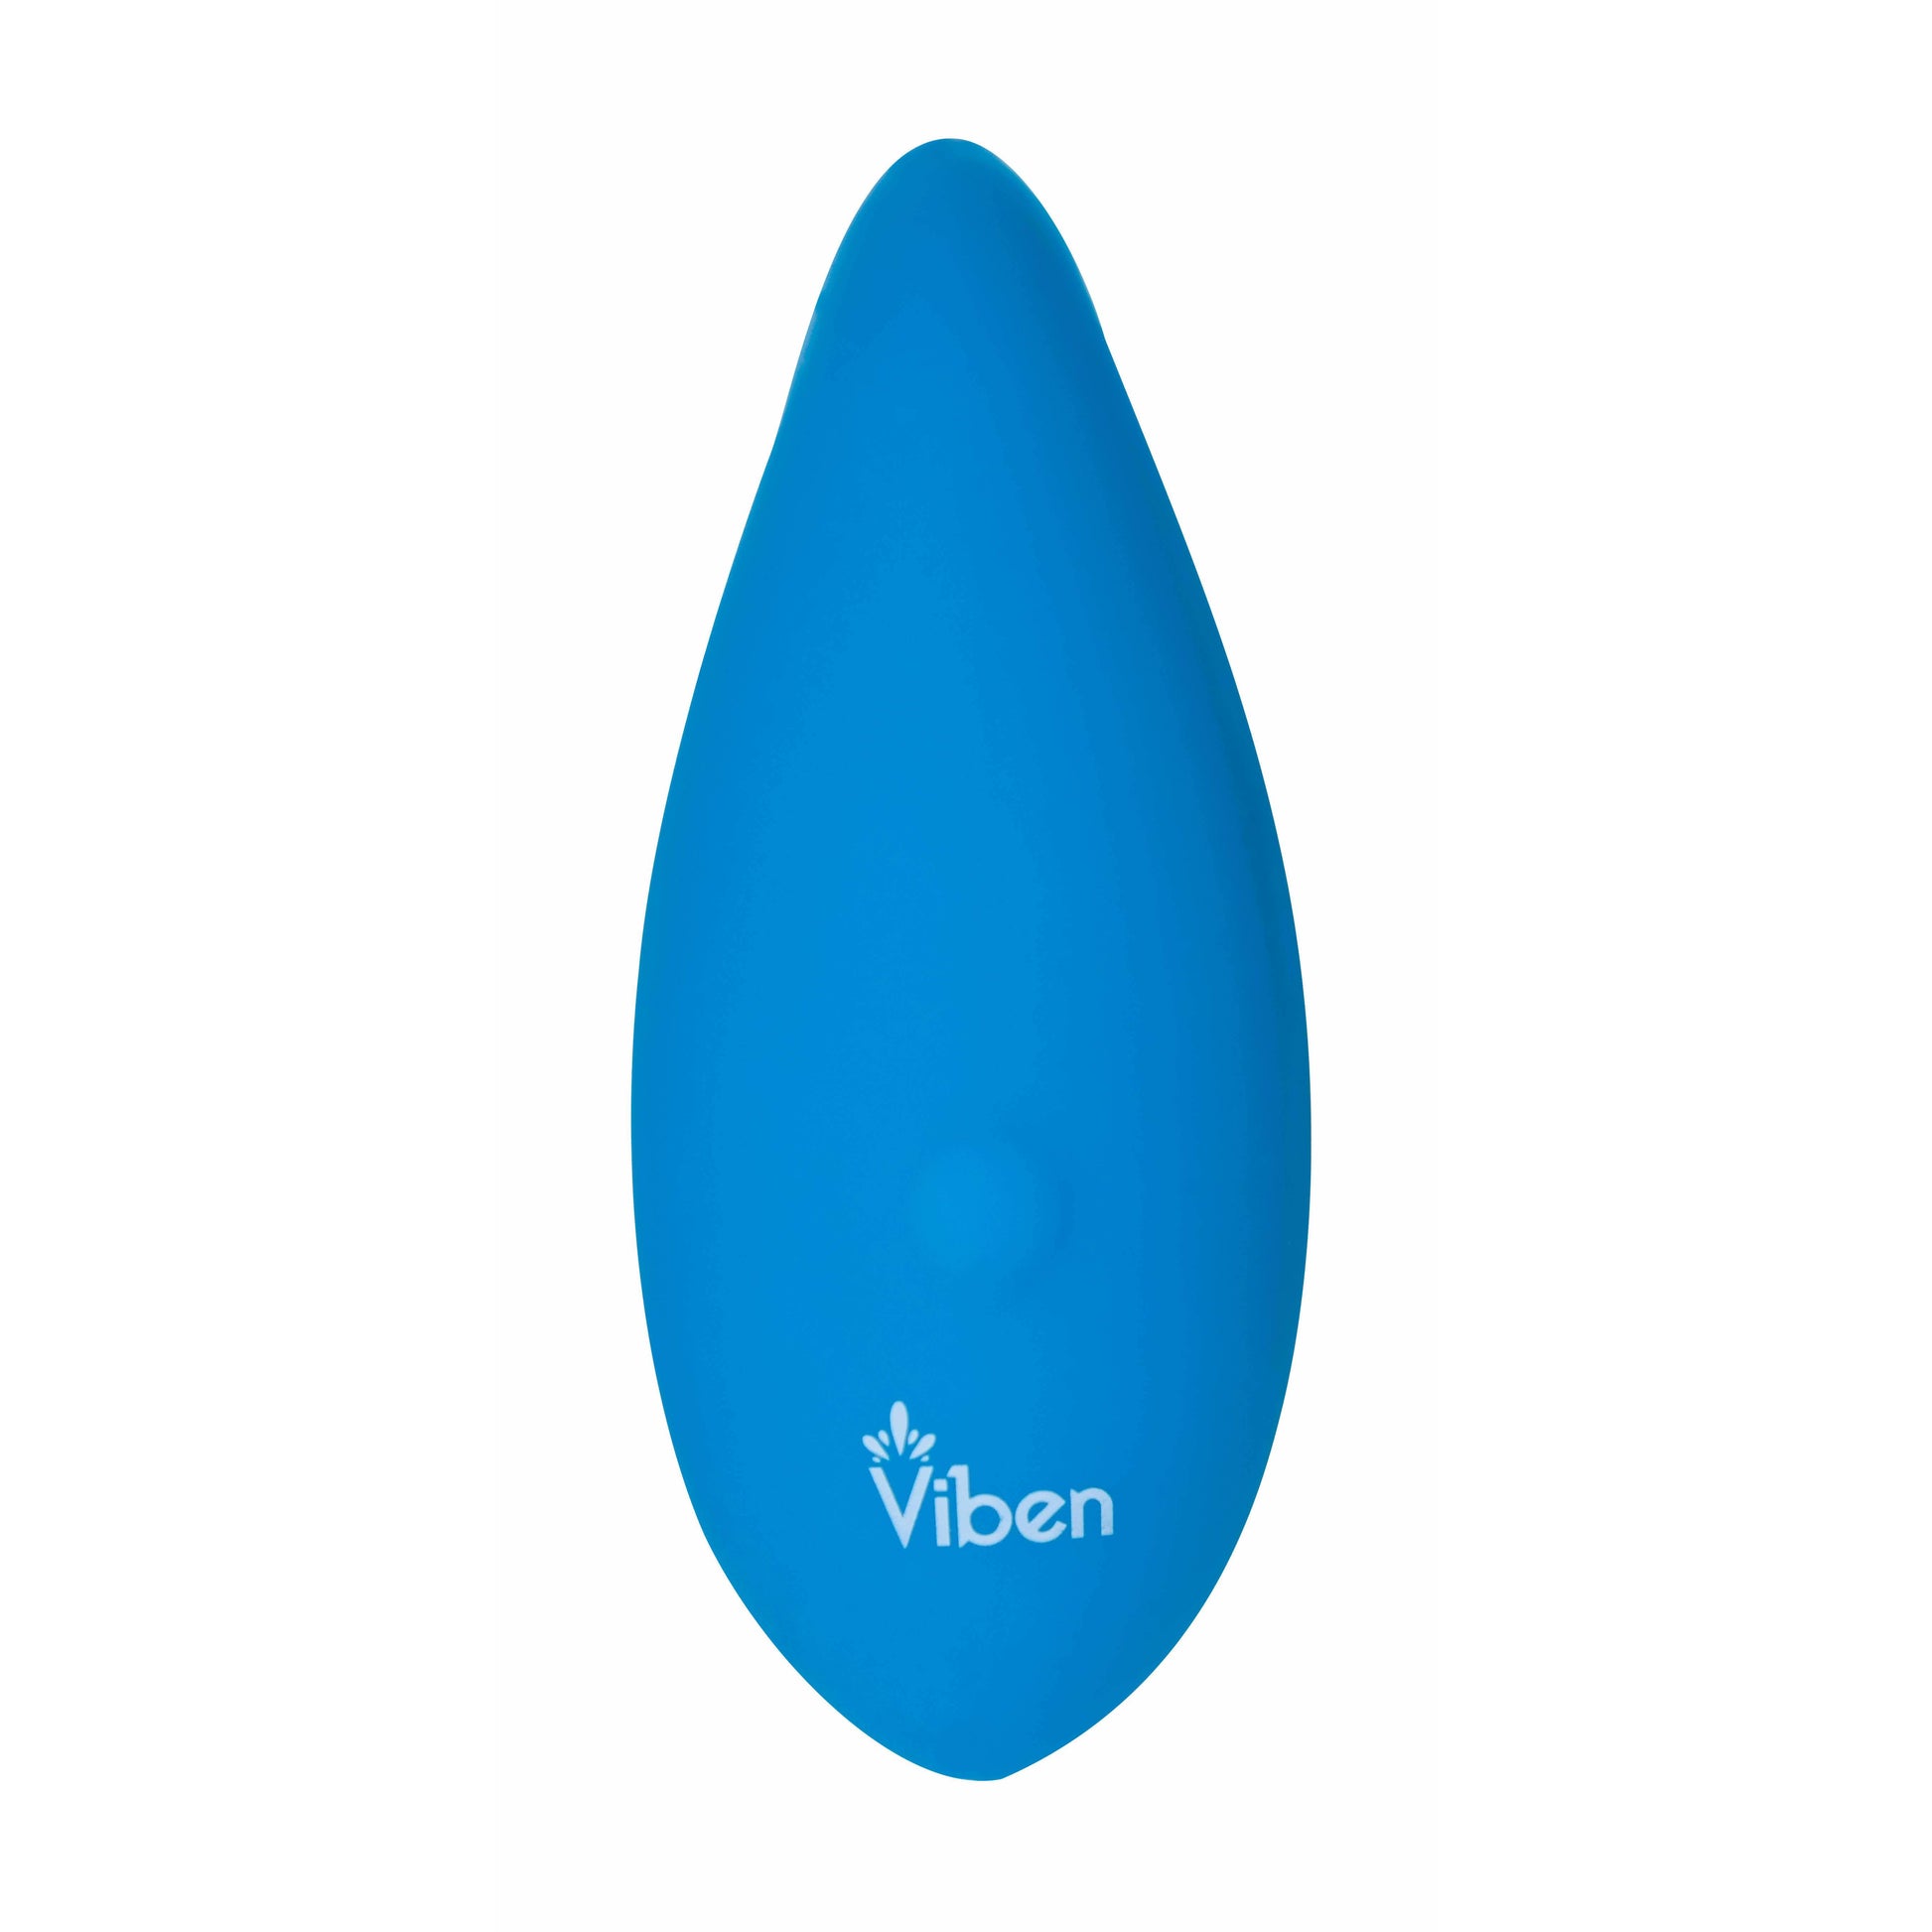 Elated Intense Hand Held Pinpoint Vibrator - Viben Toys - by The Bigger O an online sex toy shop USA, Canada & UK shipping available.